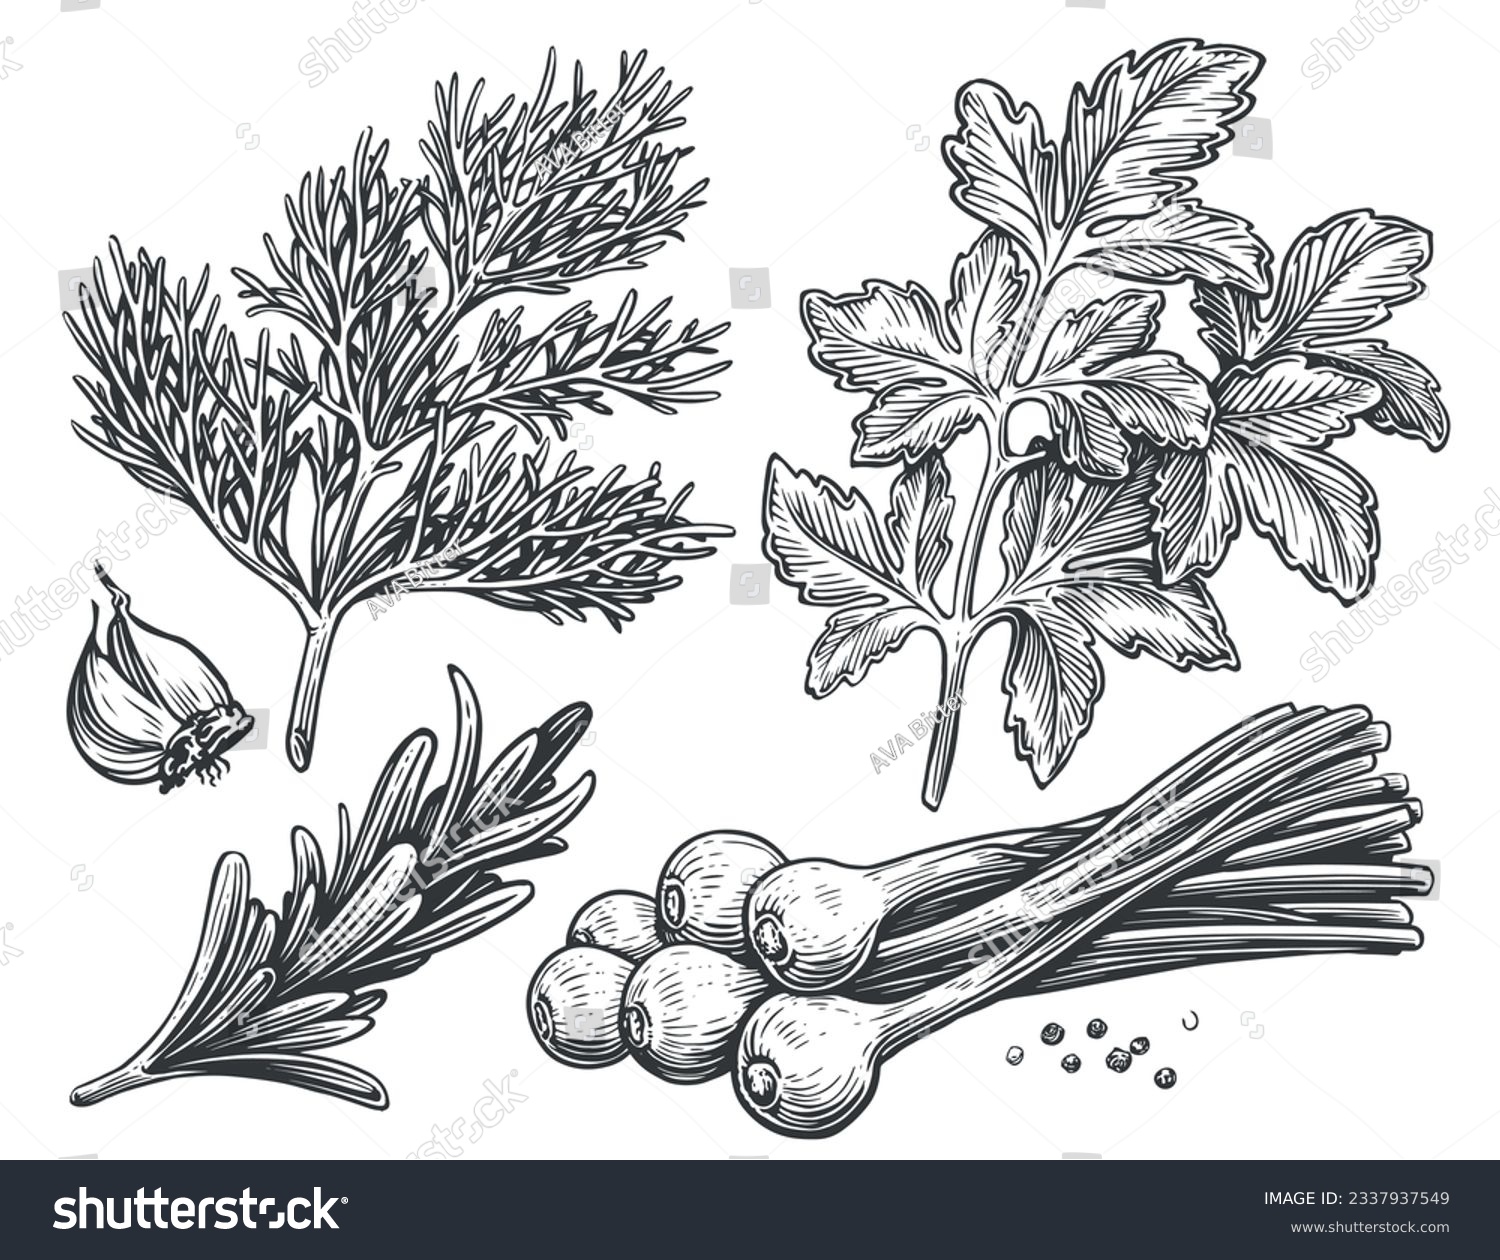 SVG of Dill, parsley, chives, rosemary, garlic, peppercorns. Set of spicy spices for food cooking. Sketch vector illustration svg